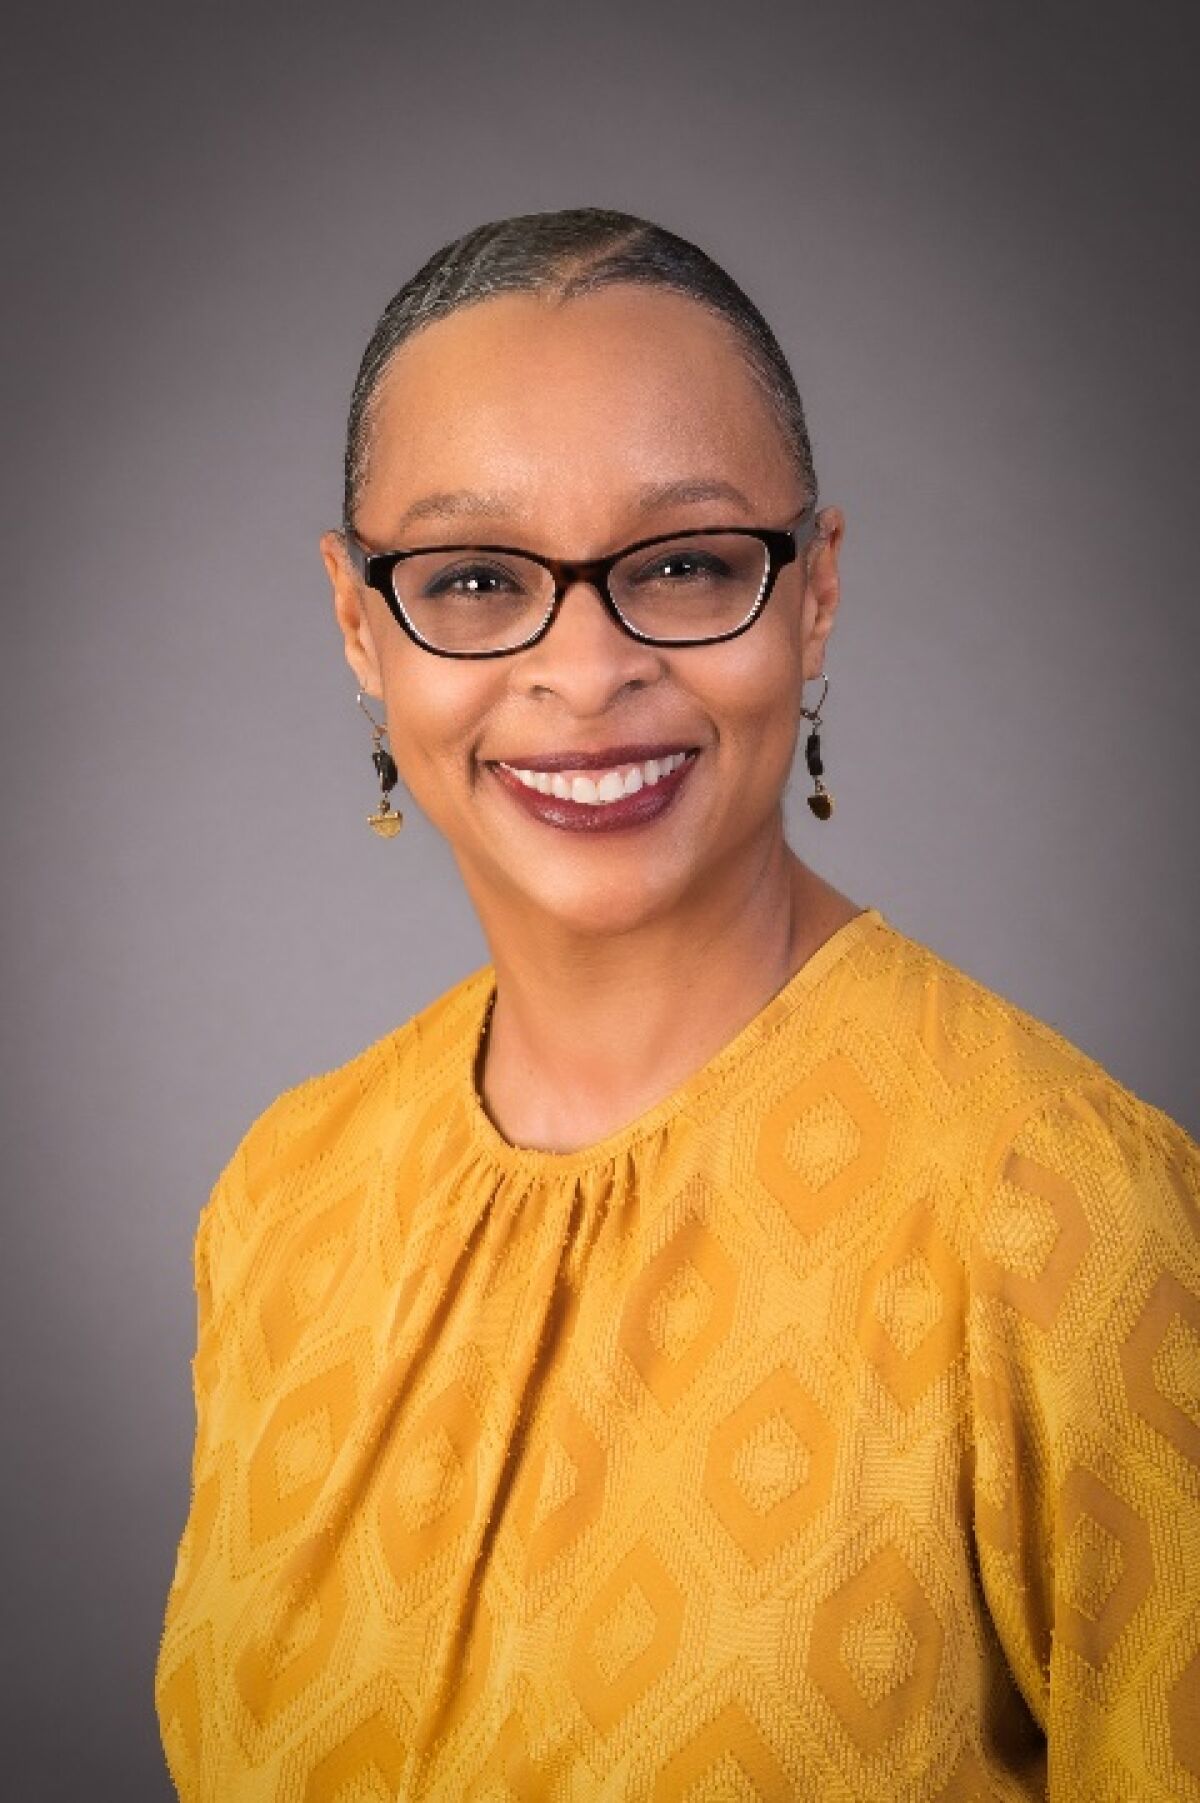 Ashanti Hands was named the new president of San Diego Mesa College.